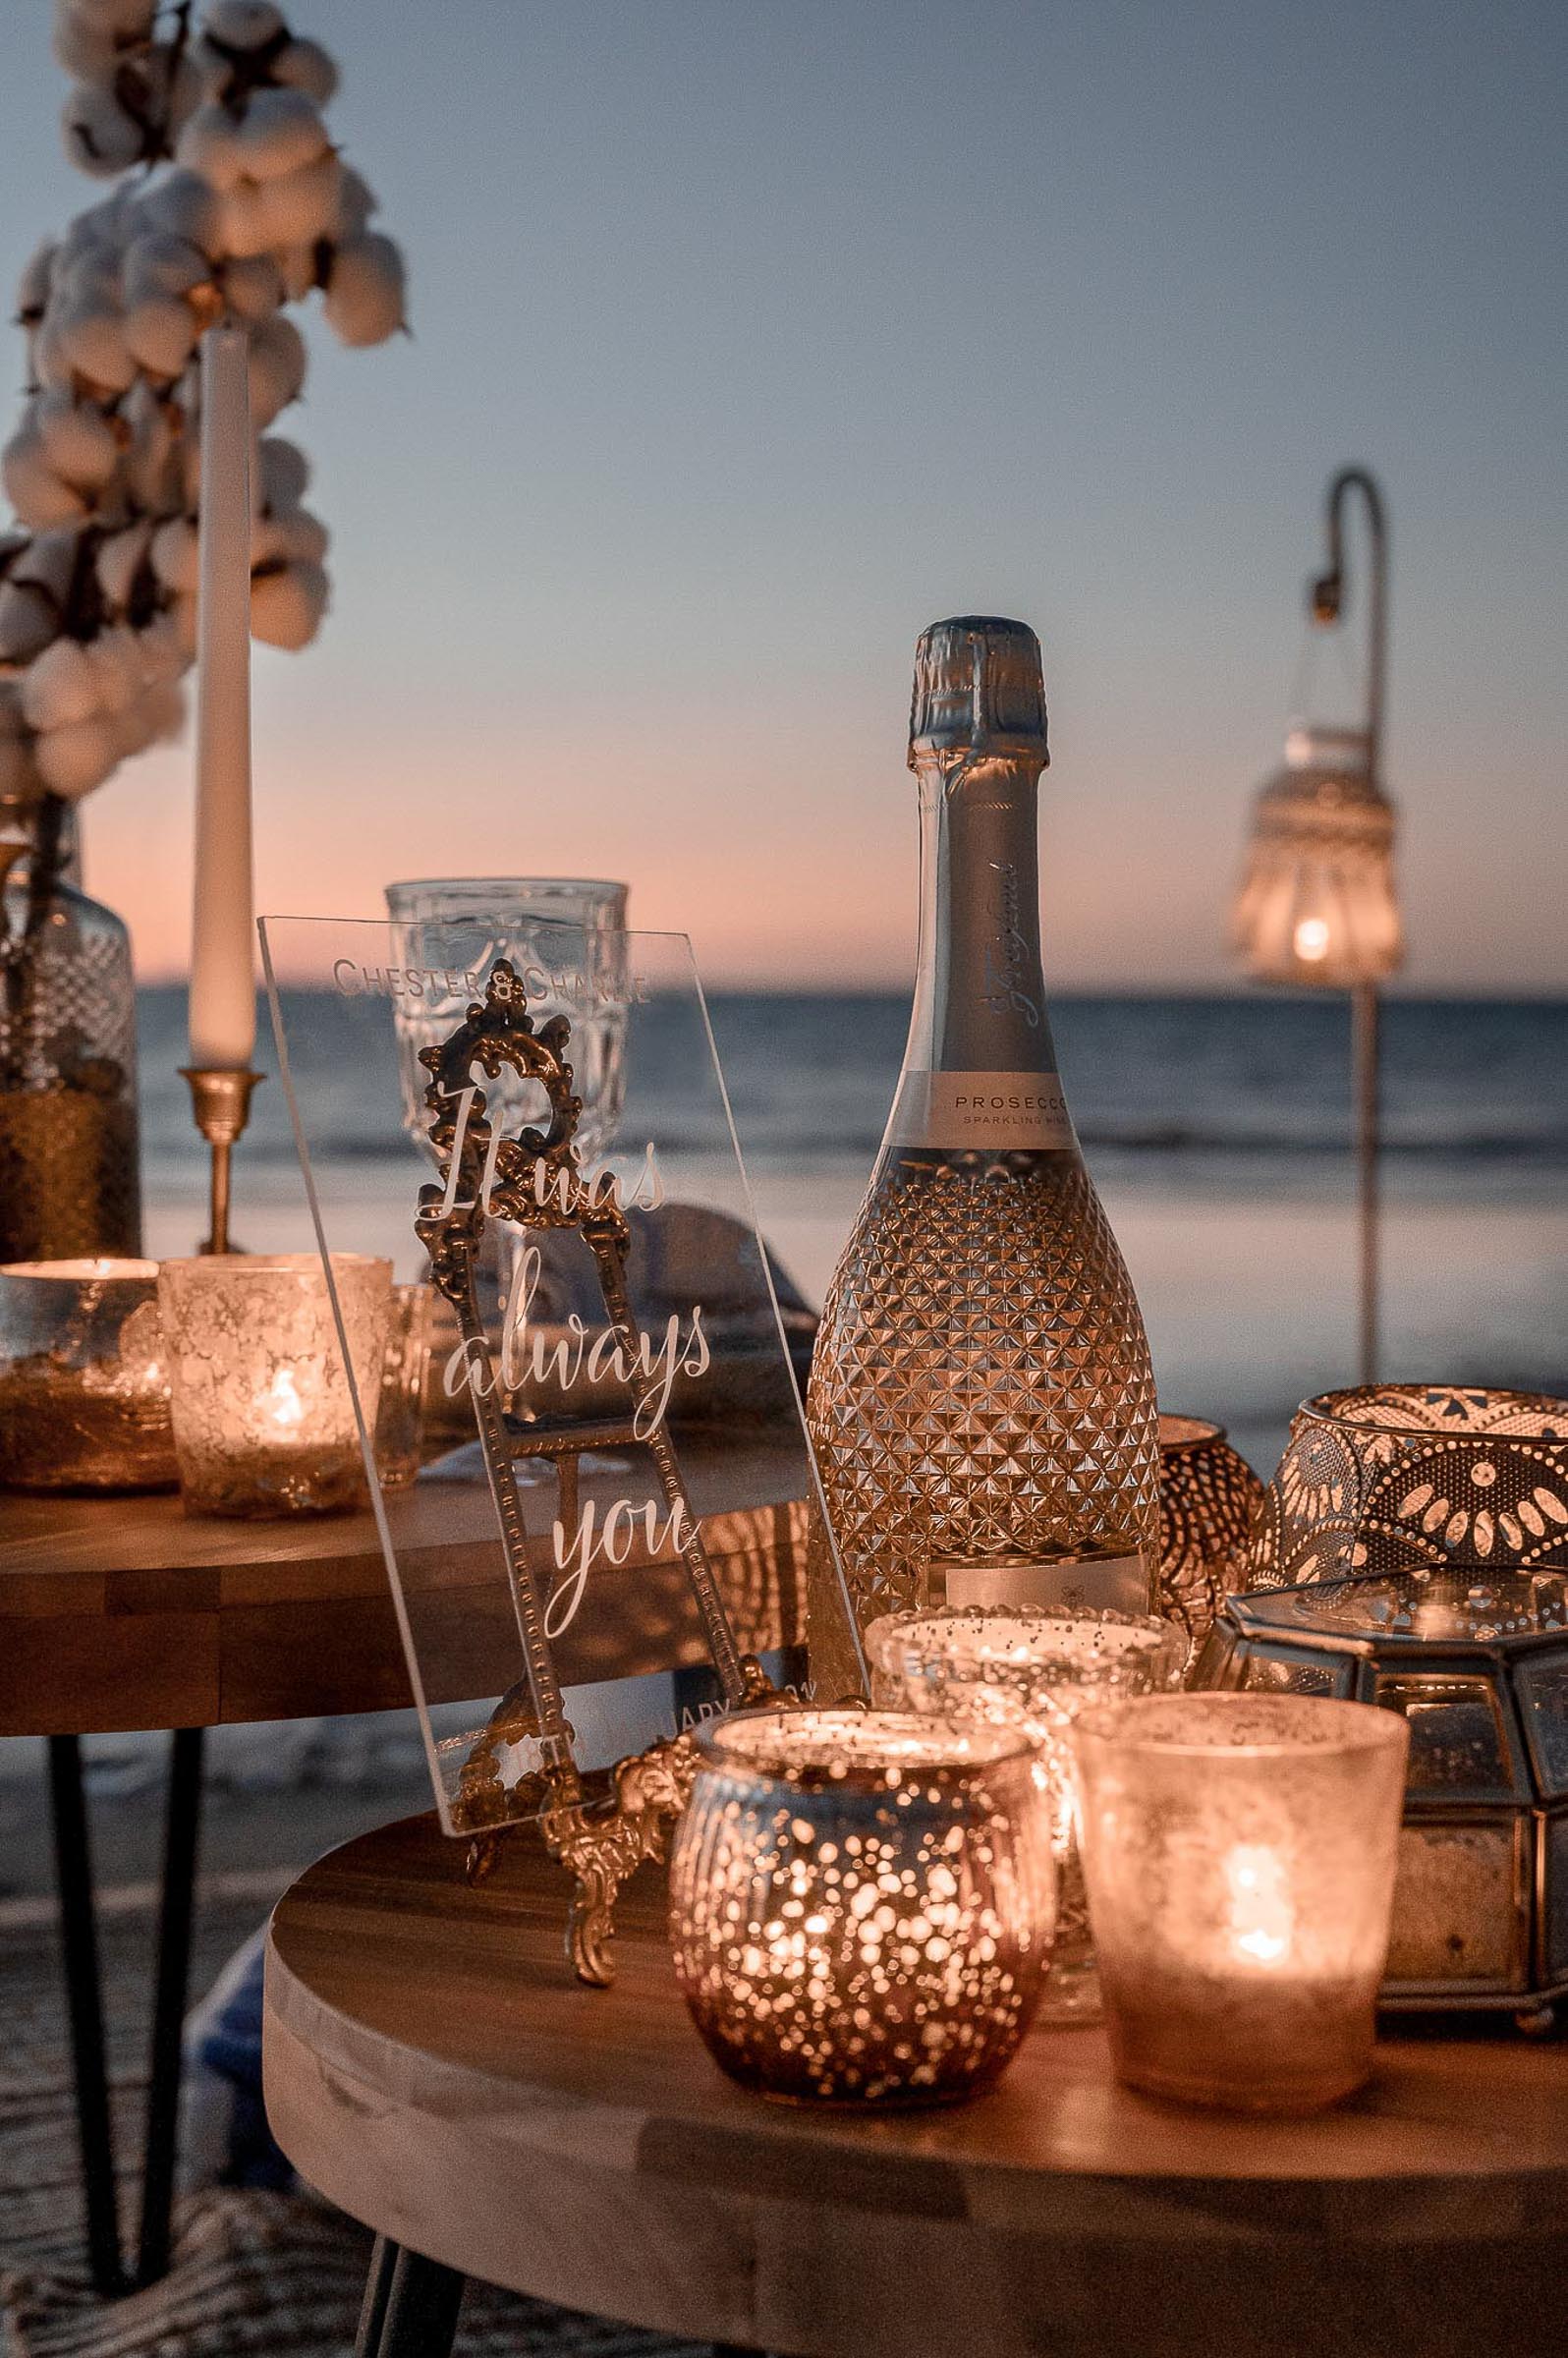 Surprise beach picnic proposal at sunset - close up of candle holders and table settings - Photography credits: Nargis Rahimi